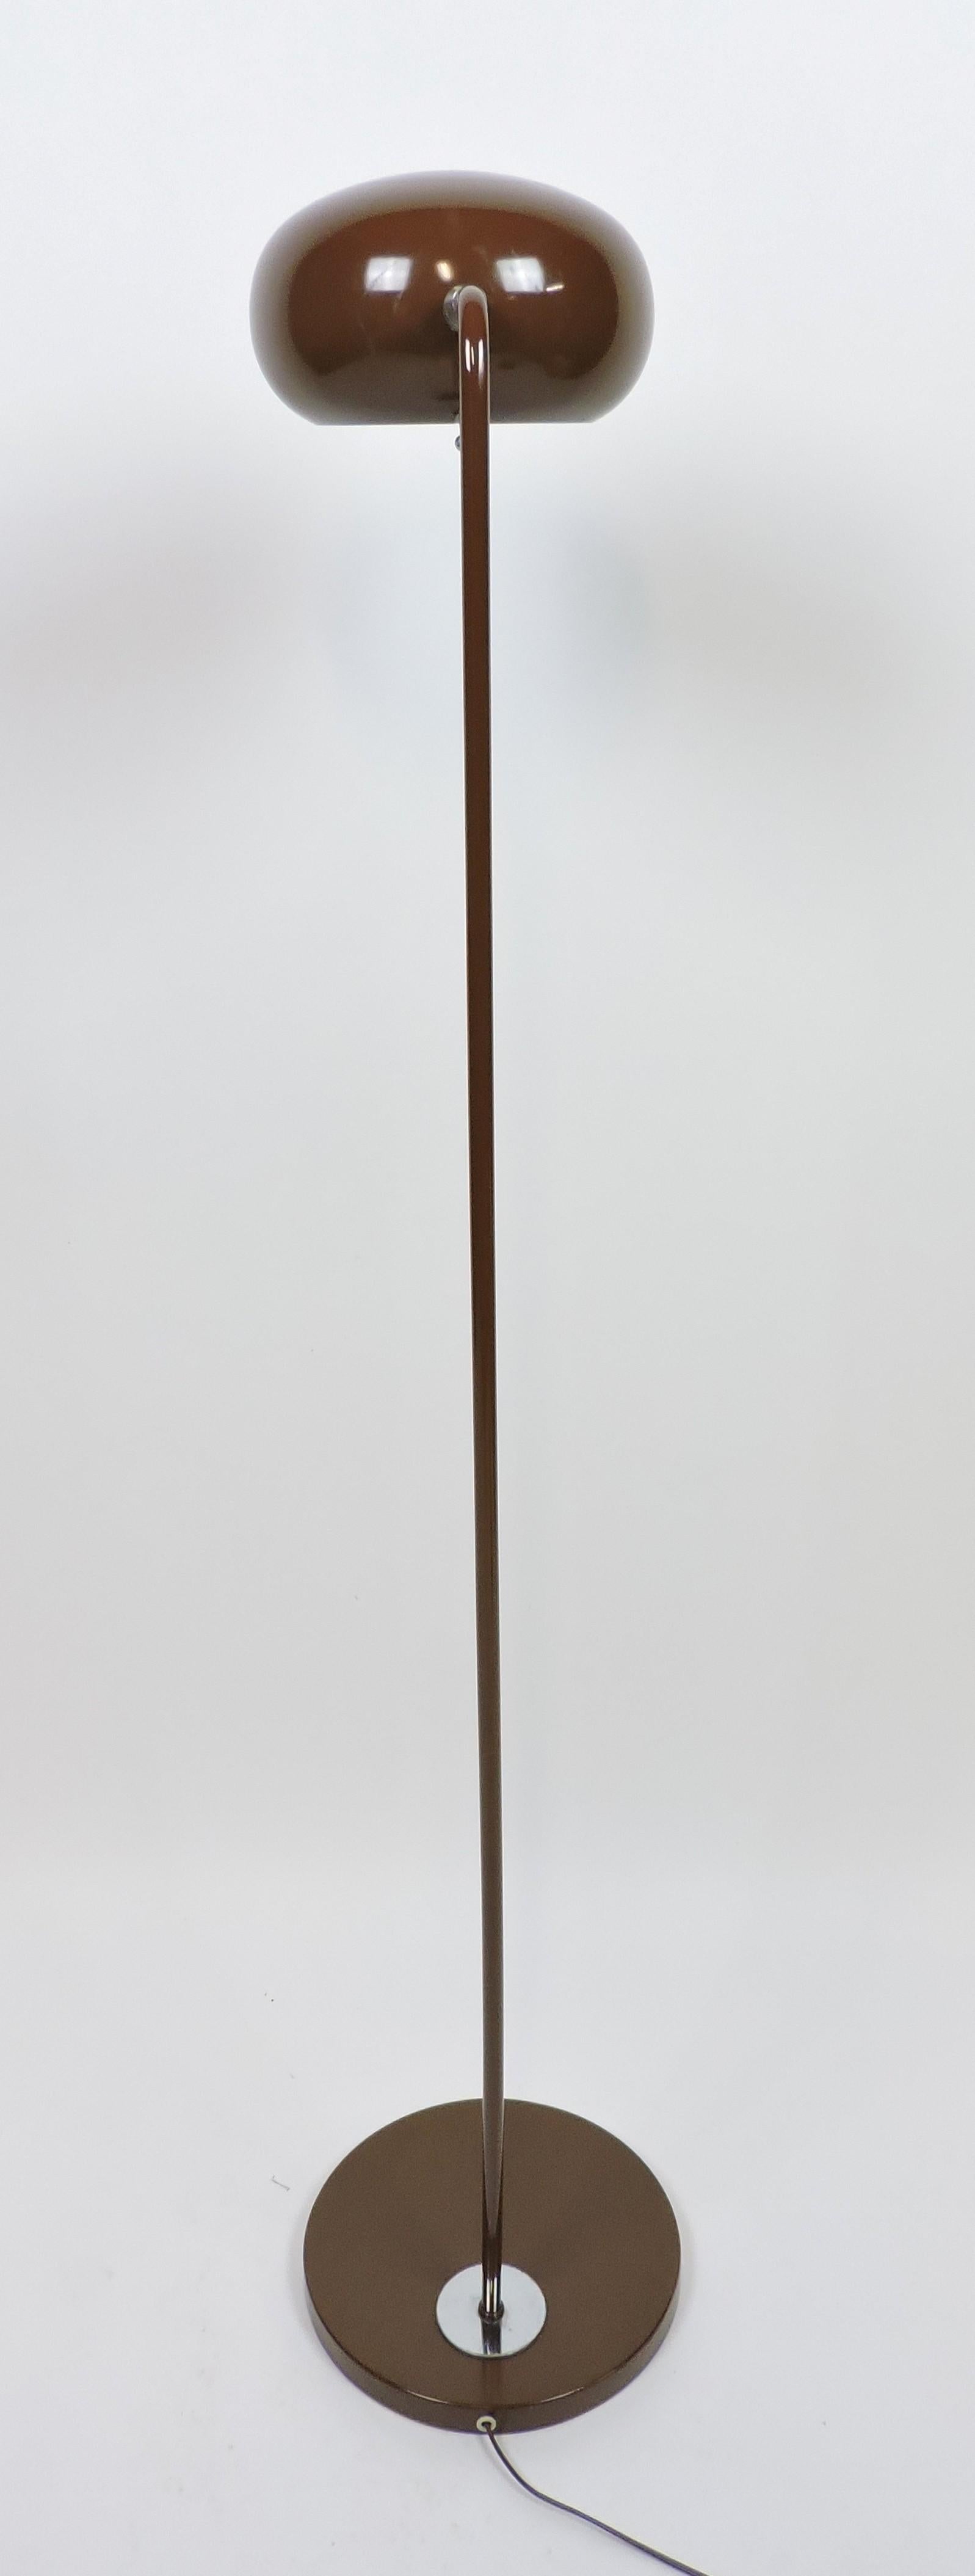 Mid-Century Modern Brown Enamel Metal Floor Lamp with Articulated Shade For Sale 2